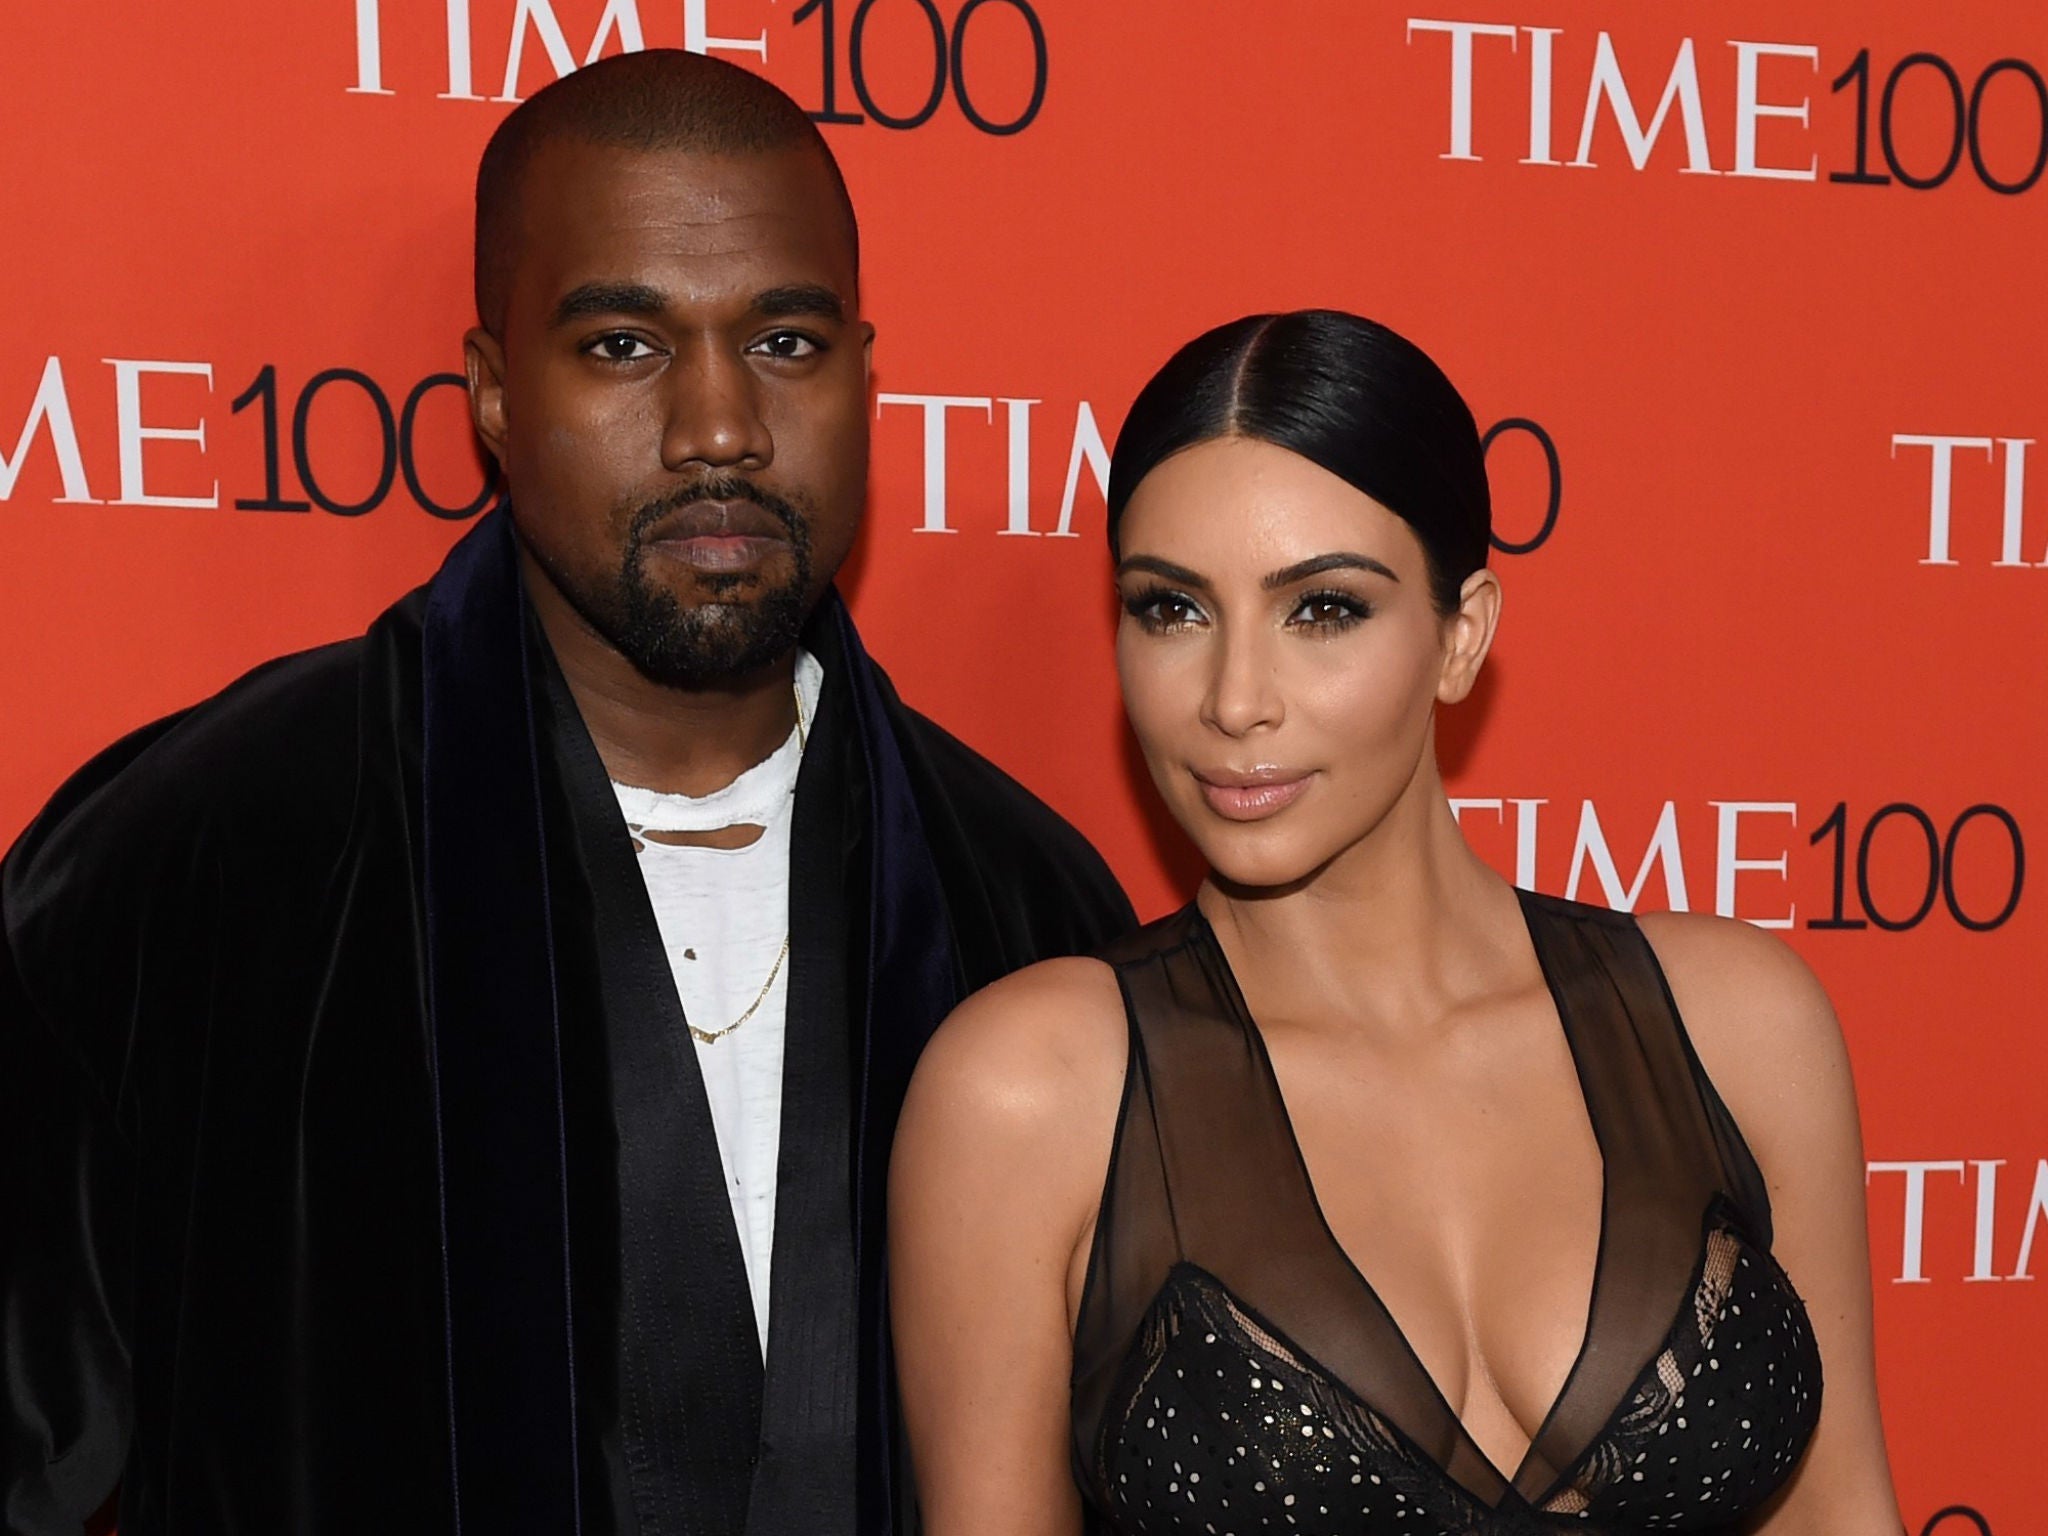 West and Kardashian at the TIME 100 gala in 2015